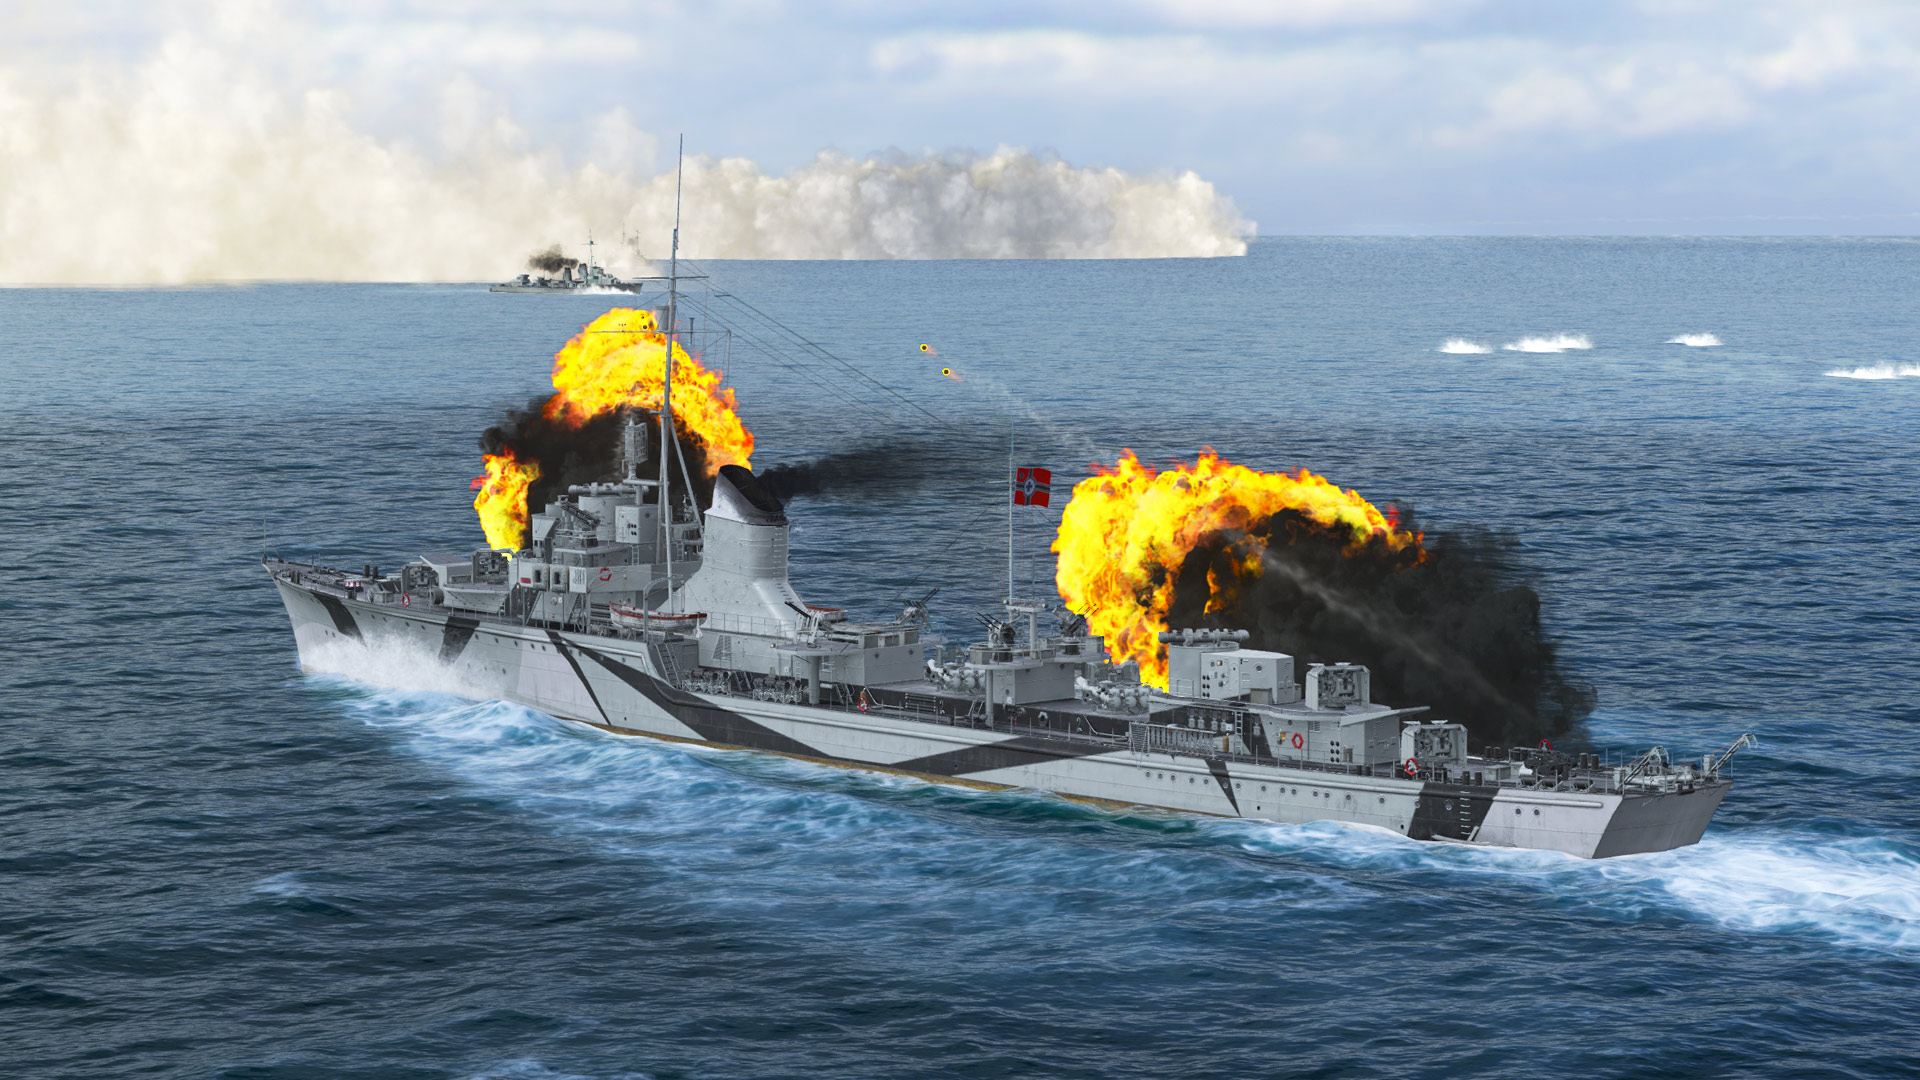 world of warships: legends store